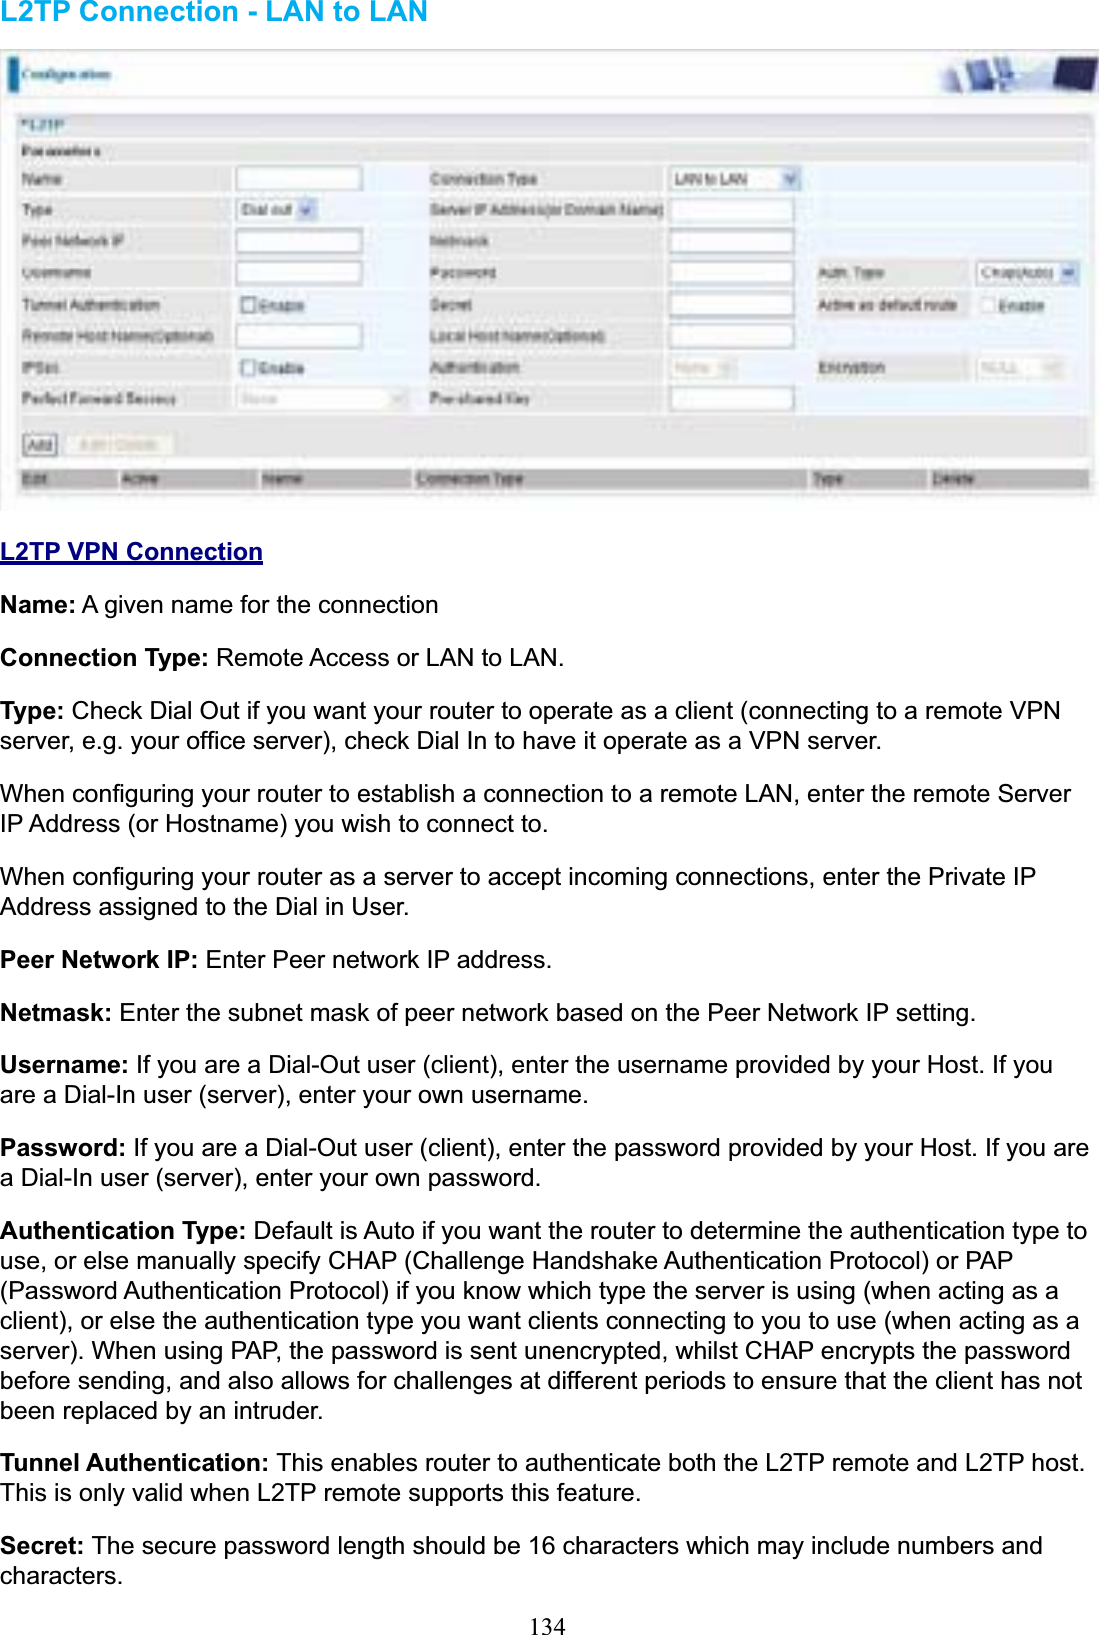 134L2TP Connection - LAN to LANL2TP VPN ConnectionName: A given name for the connection Connection Type: Remote Access or LAN to LAN. Type: Check Dial Out if you want your router to operate as a client (connecting to a remote VPN server, e.g. your office server), check Dial In to have it operate as a VPN server. When configuring your router to establish a connection to a remote LAN, enter the remote Server IP Address (or Hostname) you wish to connect to. When configuring your router as a server to accept incoming connections, enter the Private IP Address assigned to the Dial in User. Peer Network IP: Enter Peer network IP address. Netmask: Enter the subnet mask of peer network based on the Peer Network IP setting. Username: If you are a Dial-Out user (client), enter the username provided by your Host. If you are a Dial-In user (server), enter your own username. Password: If you are a Dial-Out user (client), enter the password provided by your Host. If you are a Dial-In user (server), enter your own password. Authentication Type: Default is Auto if you want the router to determine the authentication type to use, or else manually specify CHAP (Challenge Handshake Authentication Protocol) or PAP (Password Authentication Protocol) if you know which type the server is using (when acting as a client), or else the authentication type you want clients connecting to you to use (when acting as a server). When using PAP, the password is sent unencrypted, whilst CHAP encrypts the password before sending, and also allows for challenges at different periods to ensure that the client has not been replaced by an intruder. Tunnel Authentication: This enables router to authenticate both the L2TP remote and L2TP host. This is only valid when L2TP remote supports this feature. Secret: The secure password length should be 16 characters which may include numbers and characters.